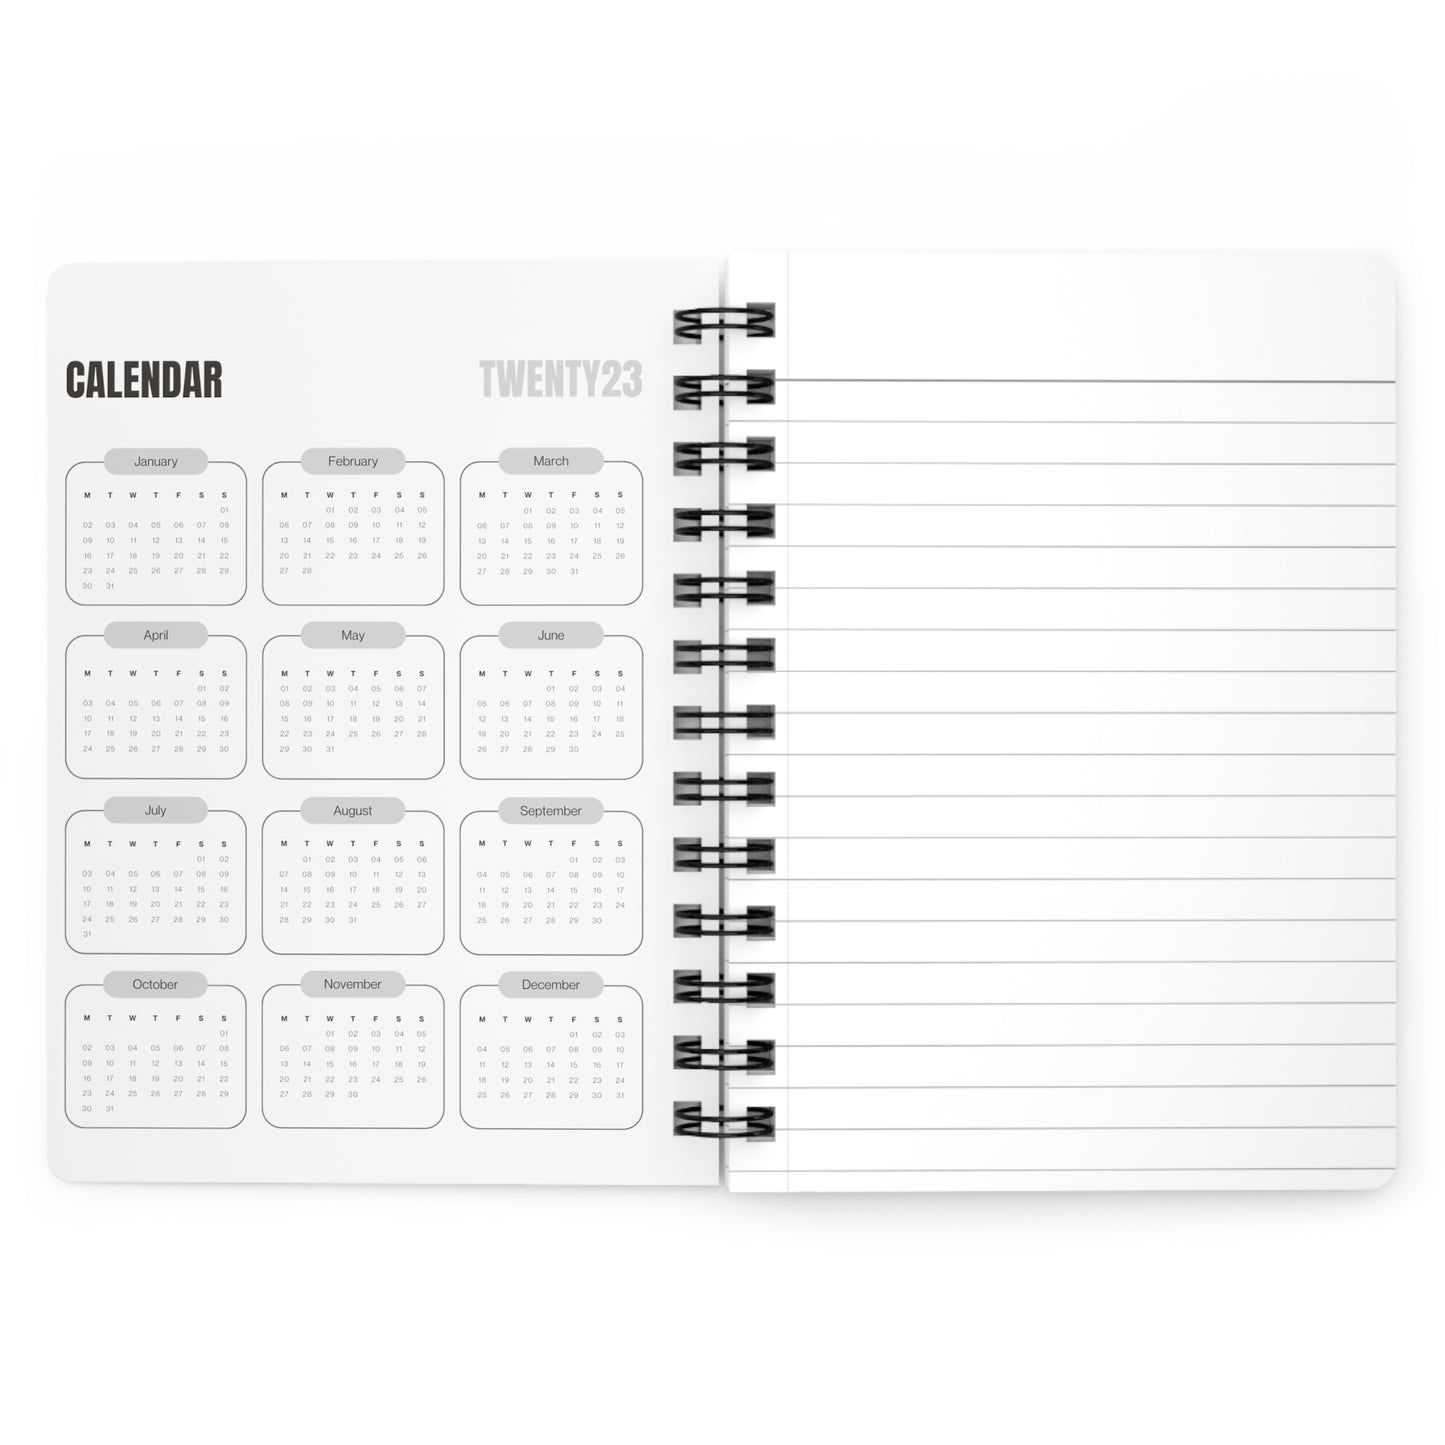 Comfortable in My Skin Spiral Bound Notebooks and Journals with 2023-2024 Year-at-a-Glance Calendar